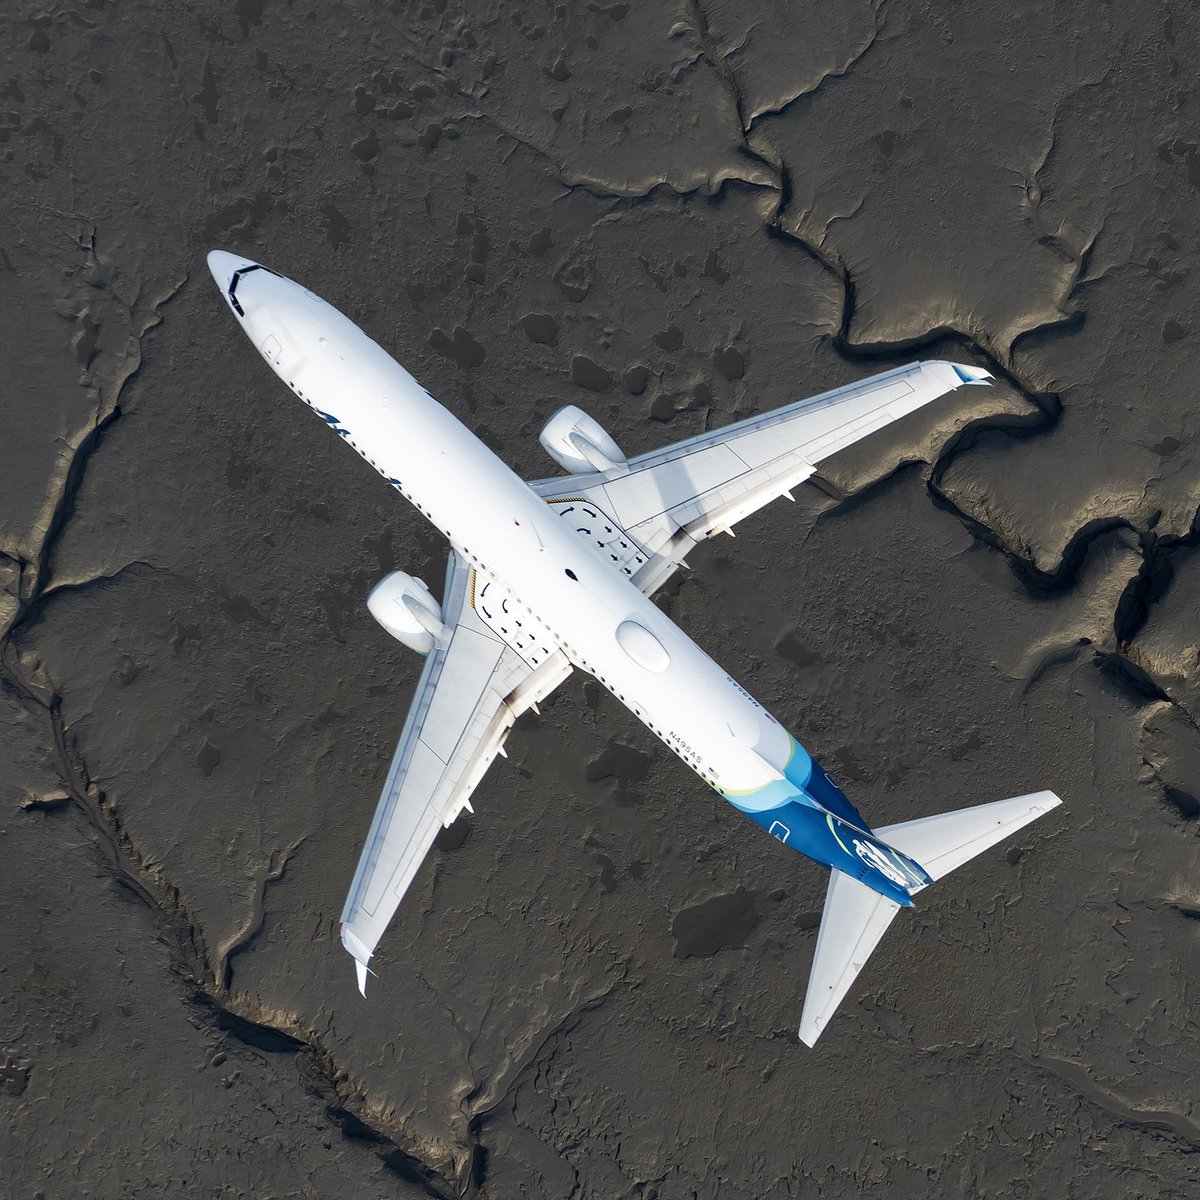 Looking like it’s flying over the terrain of another planet, this shot of an Alaska Airlines B739 that I took last June is really flying over some dramatic mud flats on final for ANC.

#aviation #AvGeek #boeing #aviationphotography #aerialphotography #alaska #alaskairlines